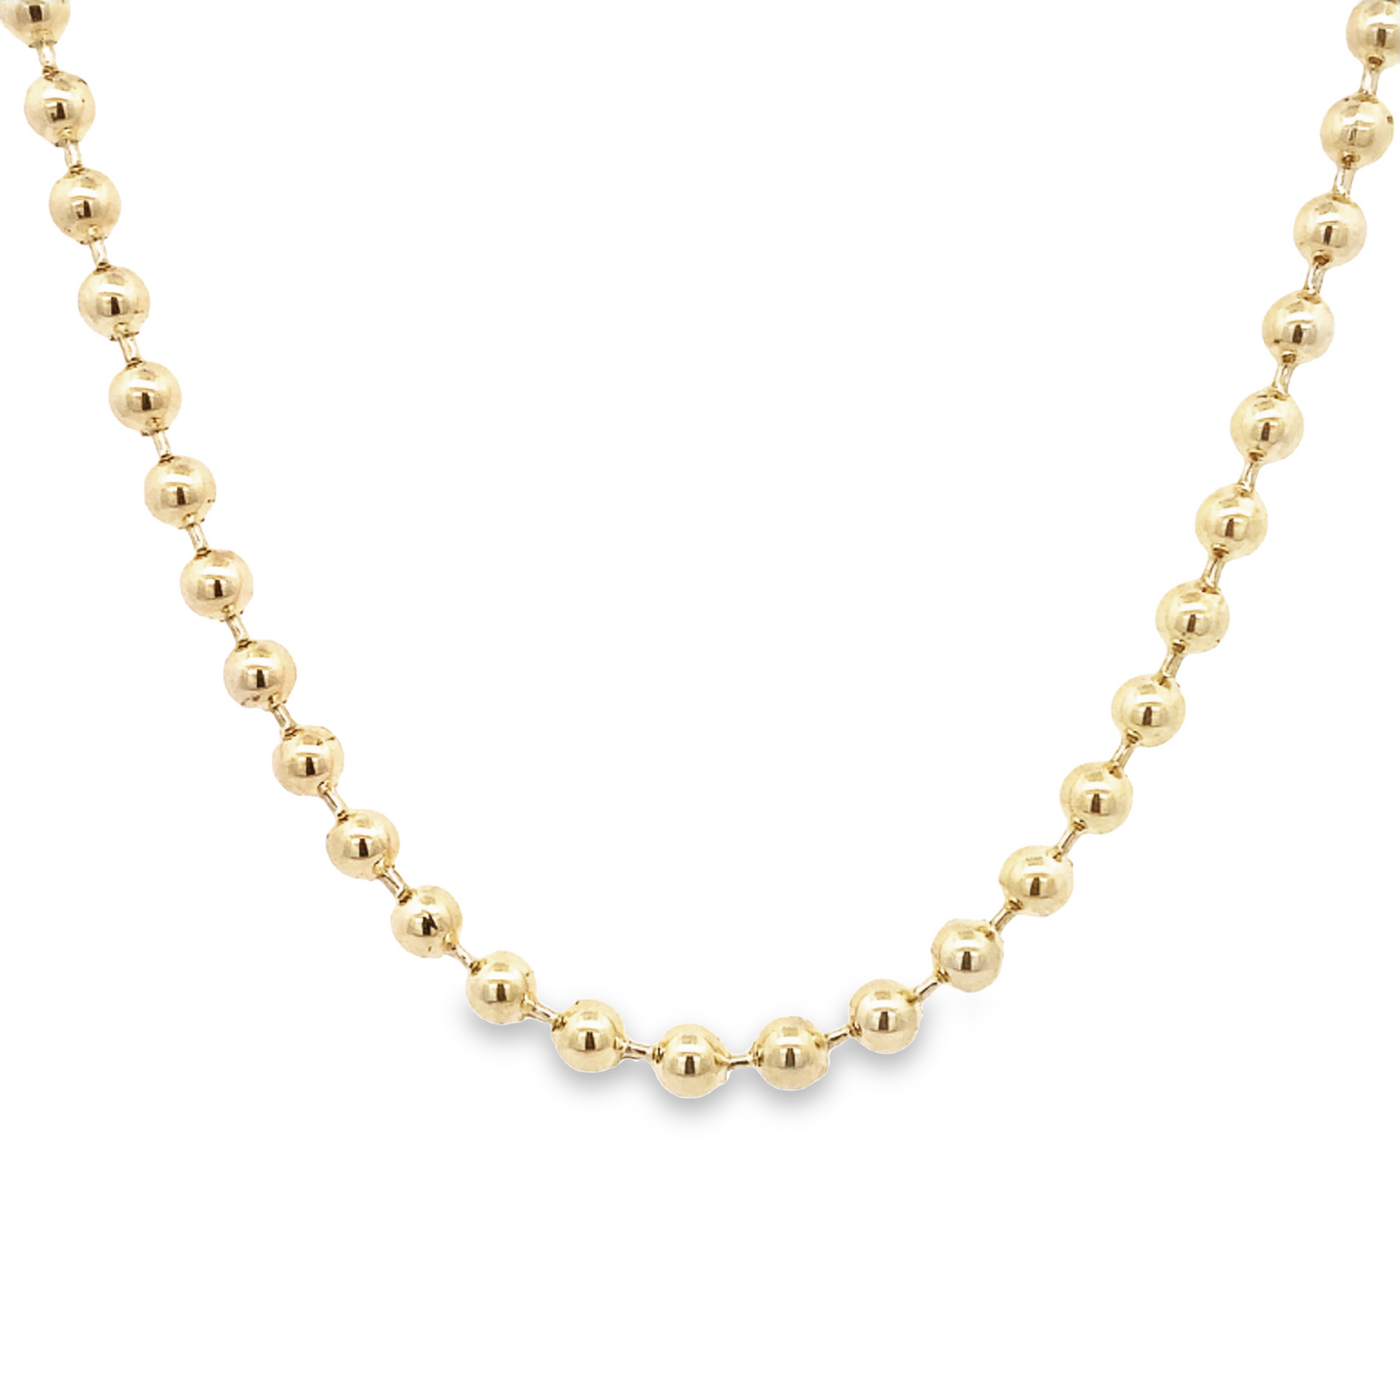 10 Karat Yellow Gold 4mm Beaded 24" Chain Necklace